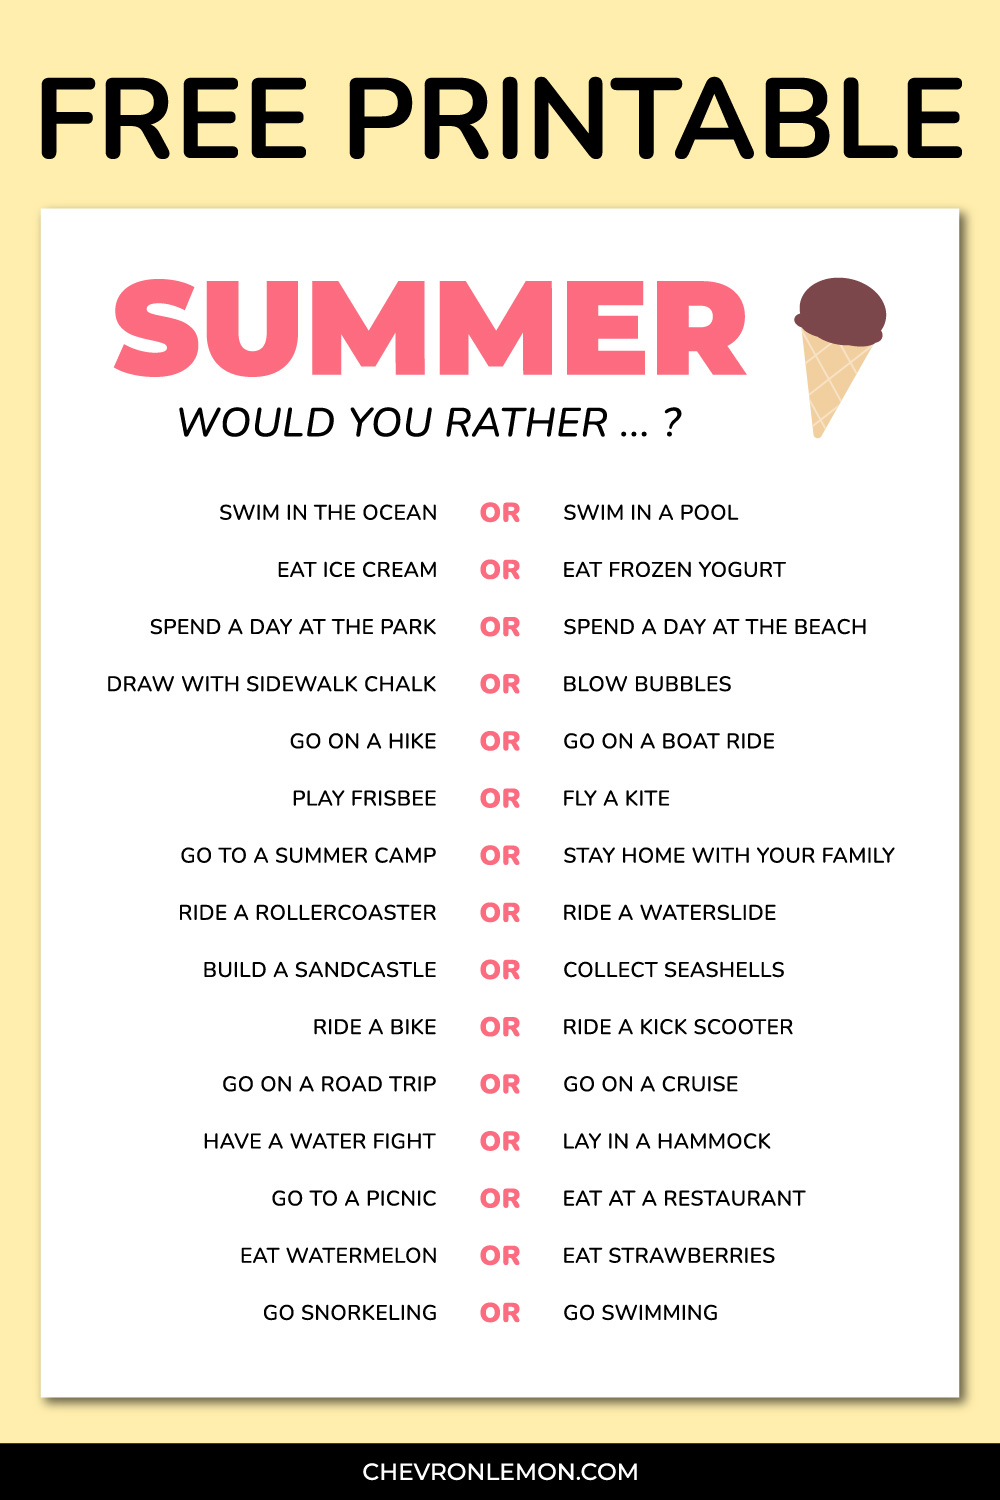 Summer Would You Rather Questions 